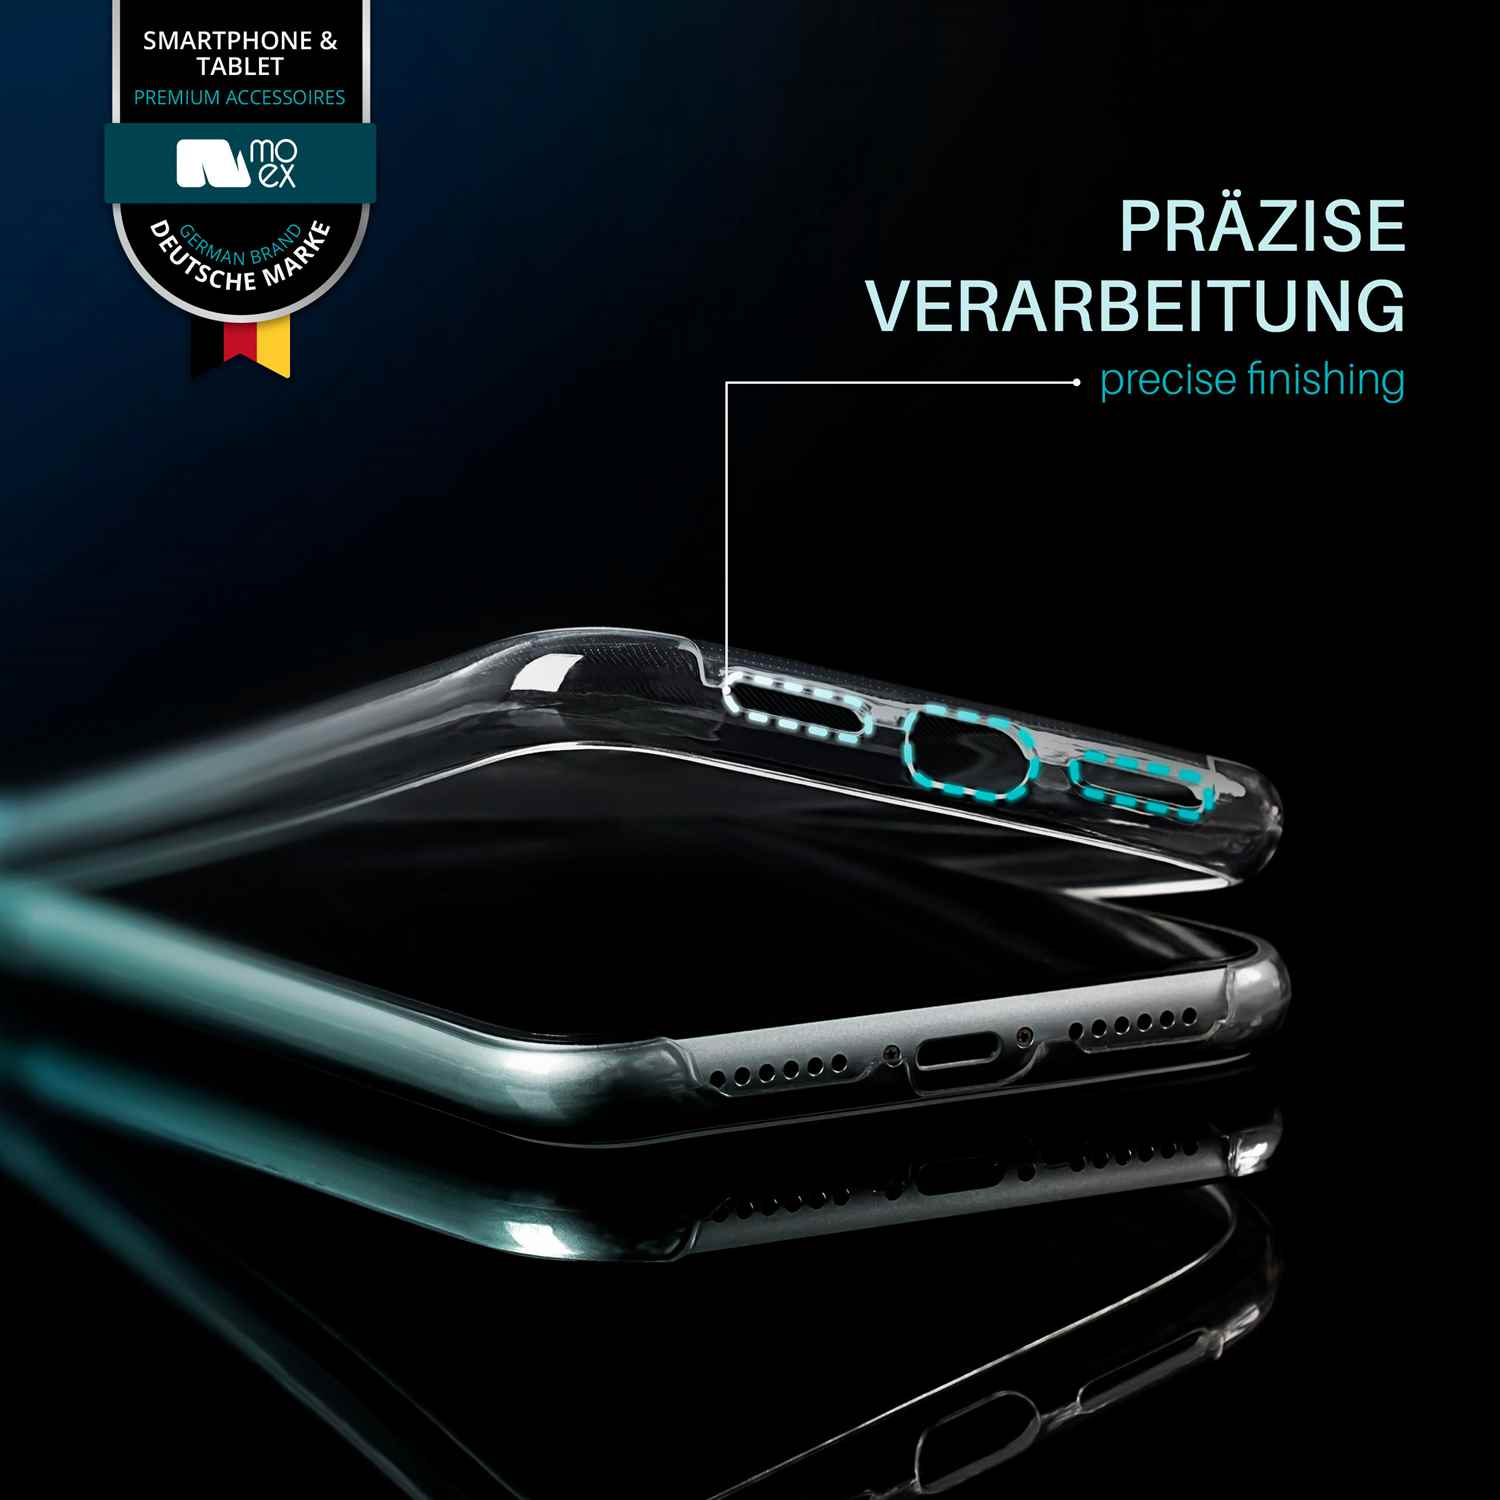 Full Galaxy Double Cover, Case, Crystal Neo, S5 MOEX Samsung,